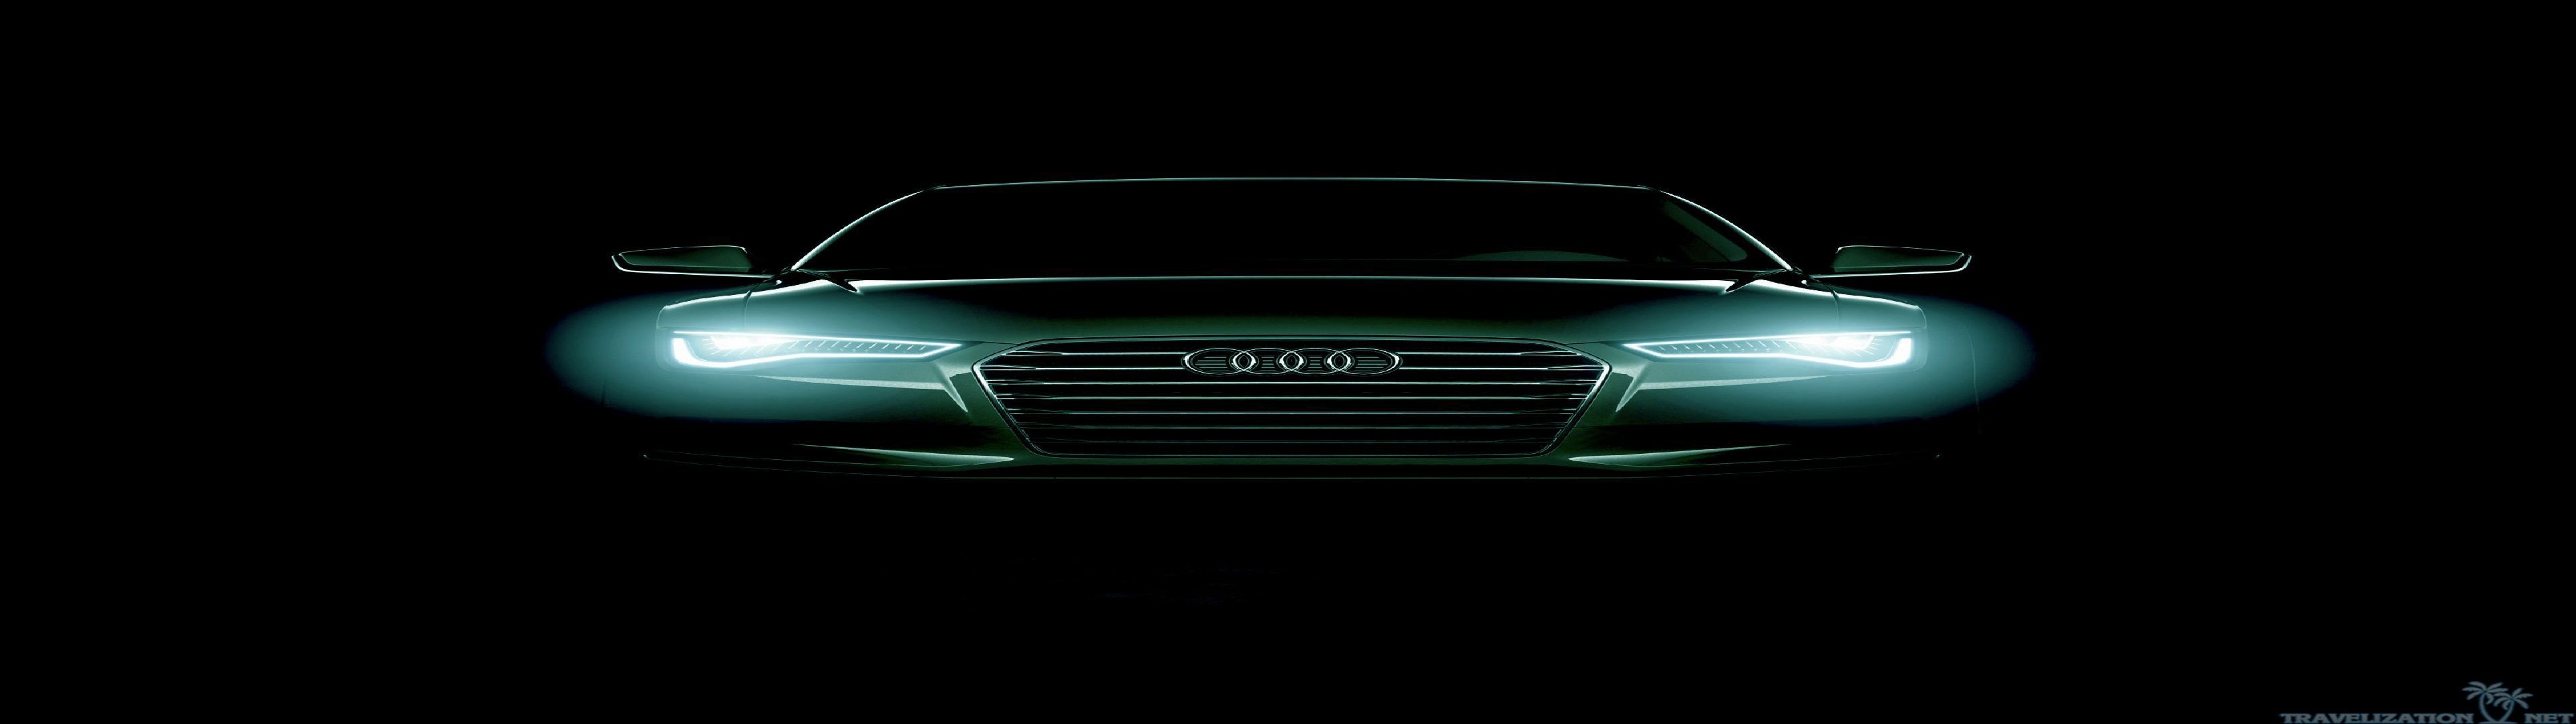 3840x1080 You can find Awesome Audi Eyes Dual Monitor Wallpapers in many resolution  such as 2560Ã1024, 2800Ã900, 3840Ã1080